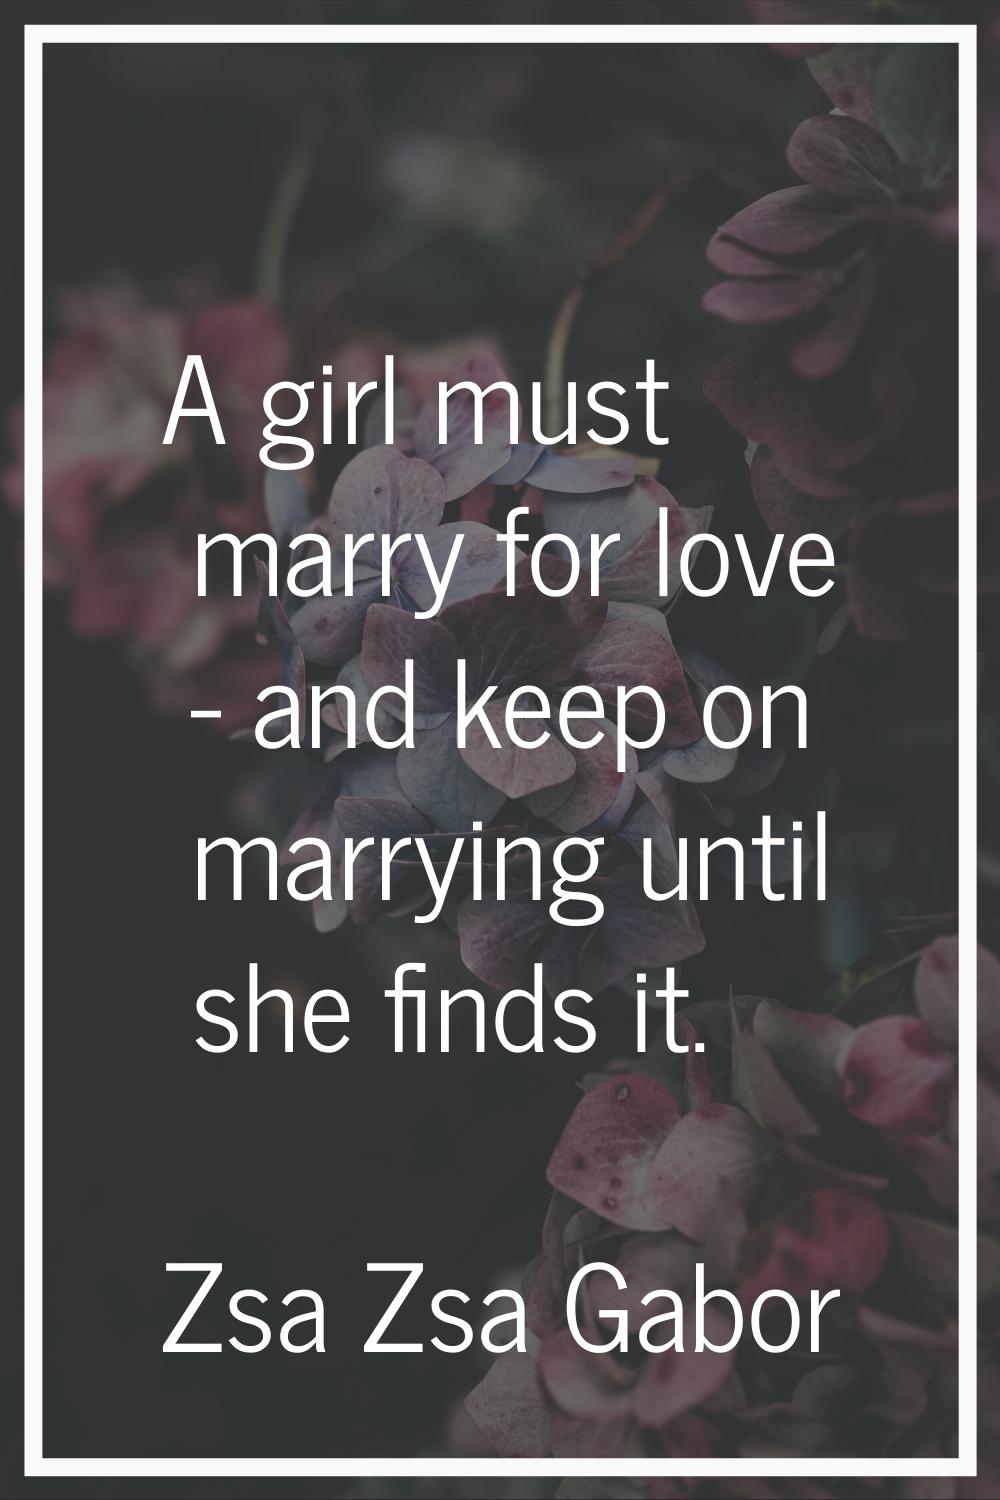 A girl must marry for love - and keep on marrying until she finds it.